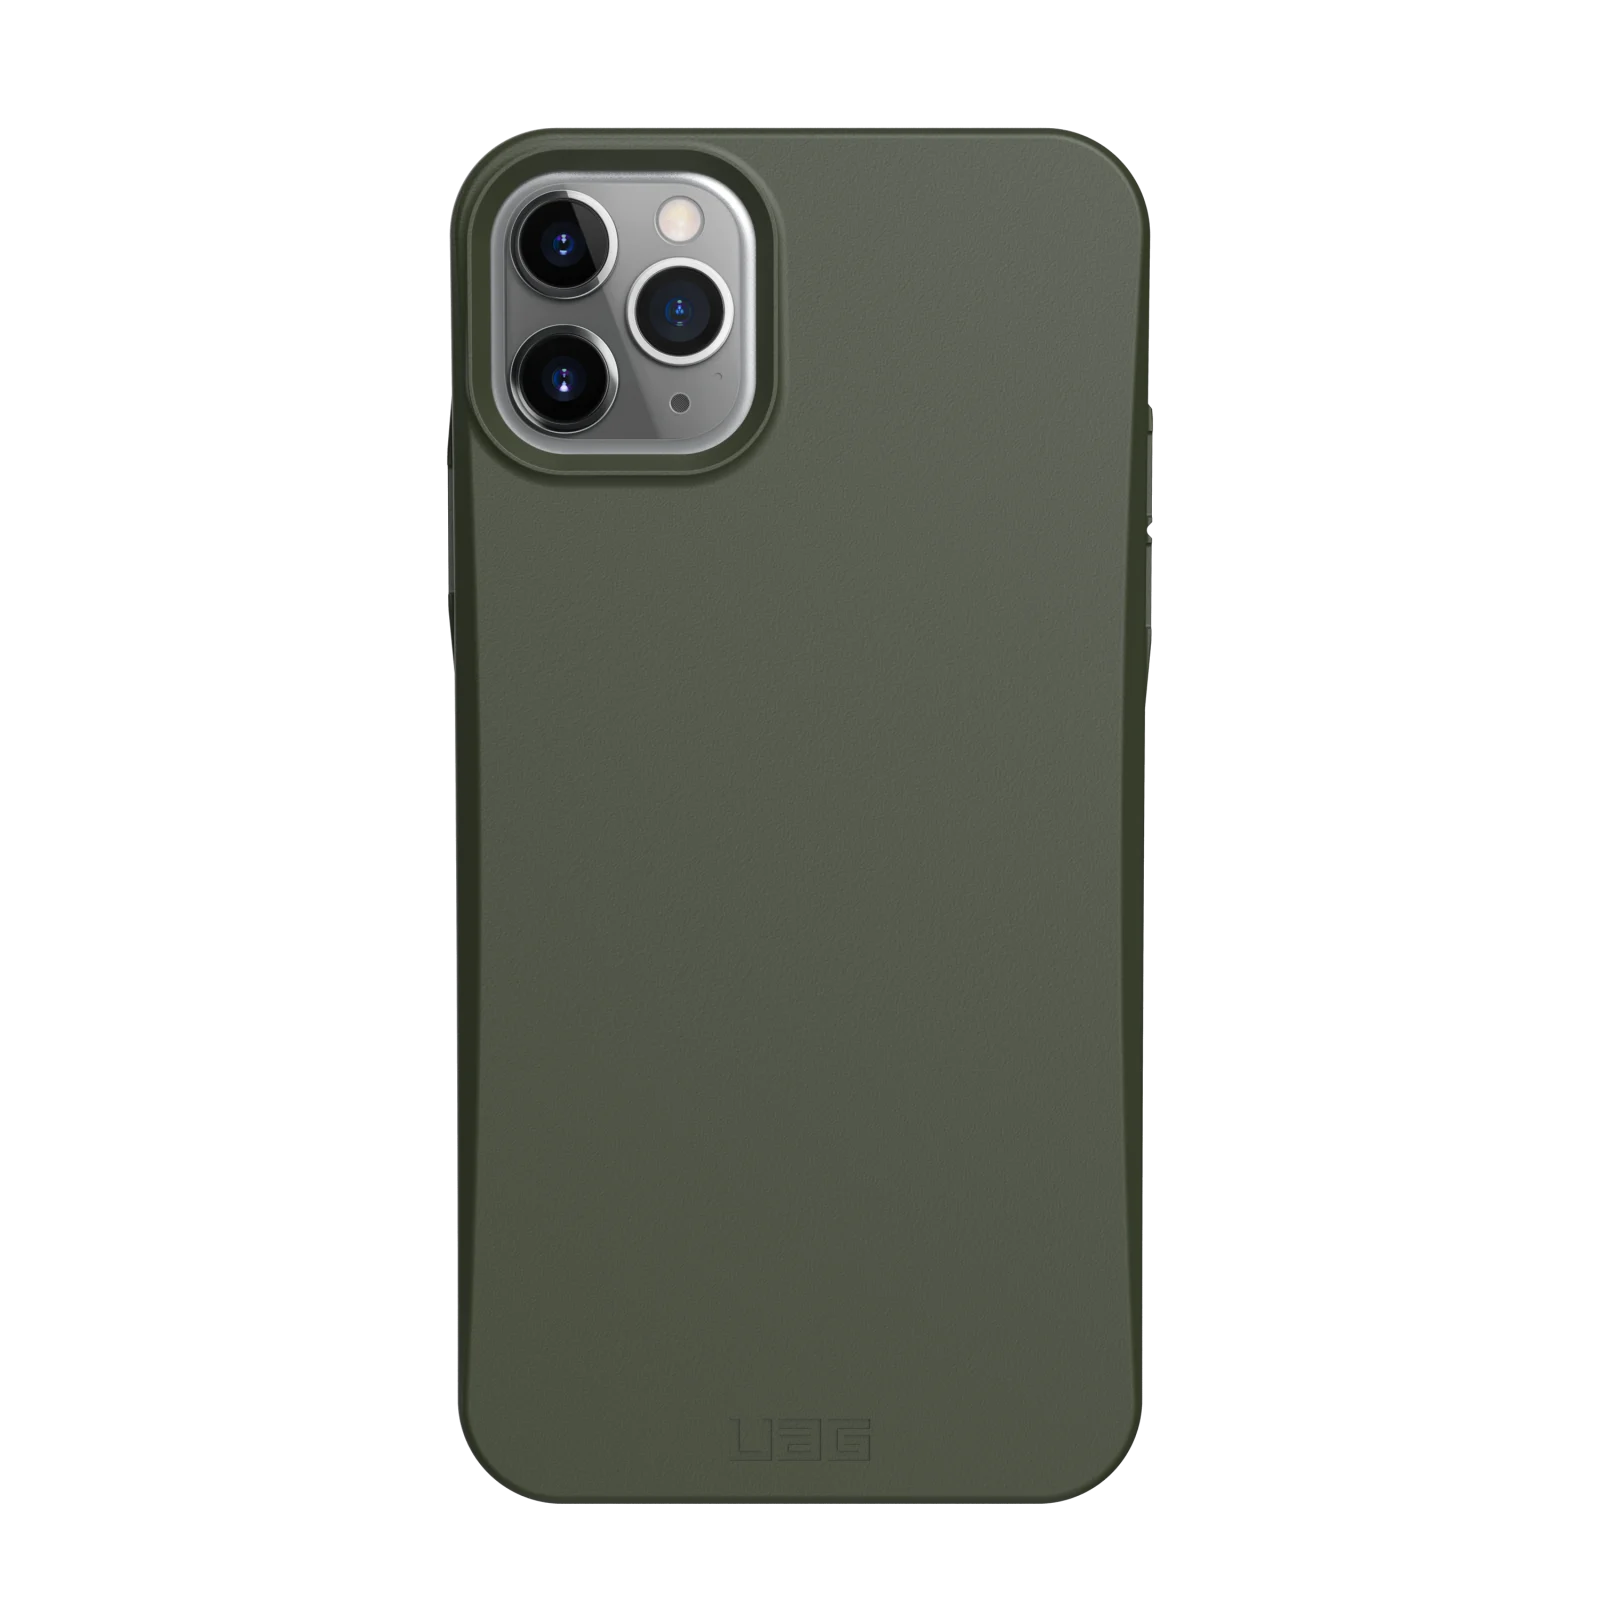 UAG Biodegradable Outback Case for iPhone 11 Series Cover & Protector